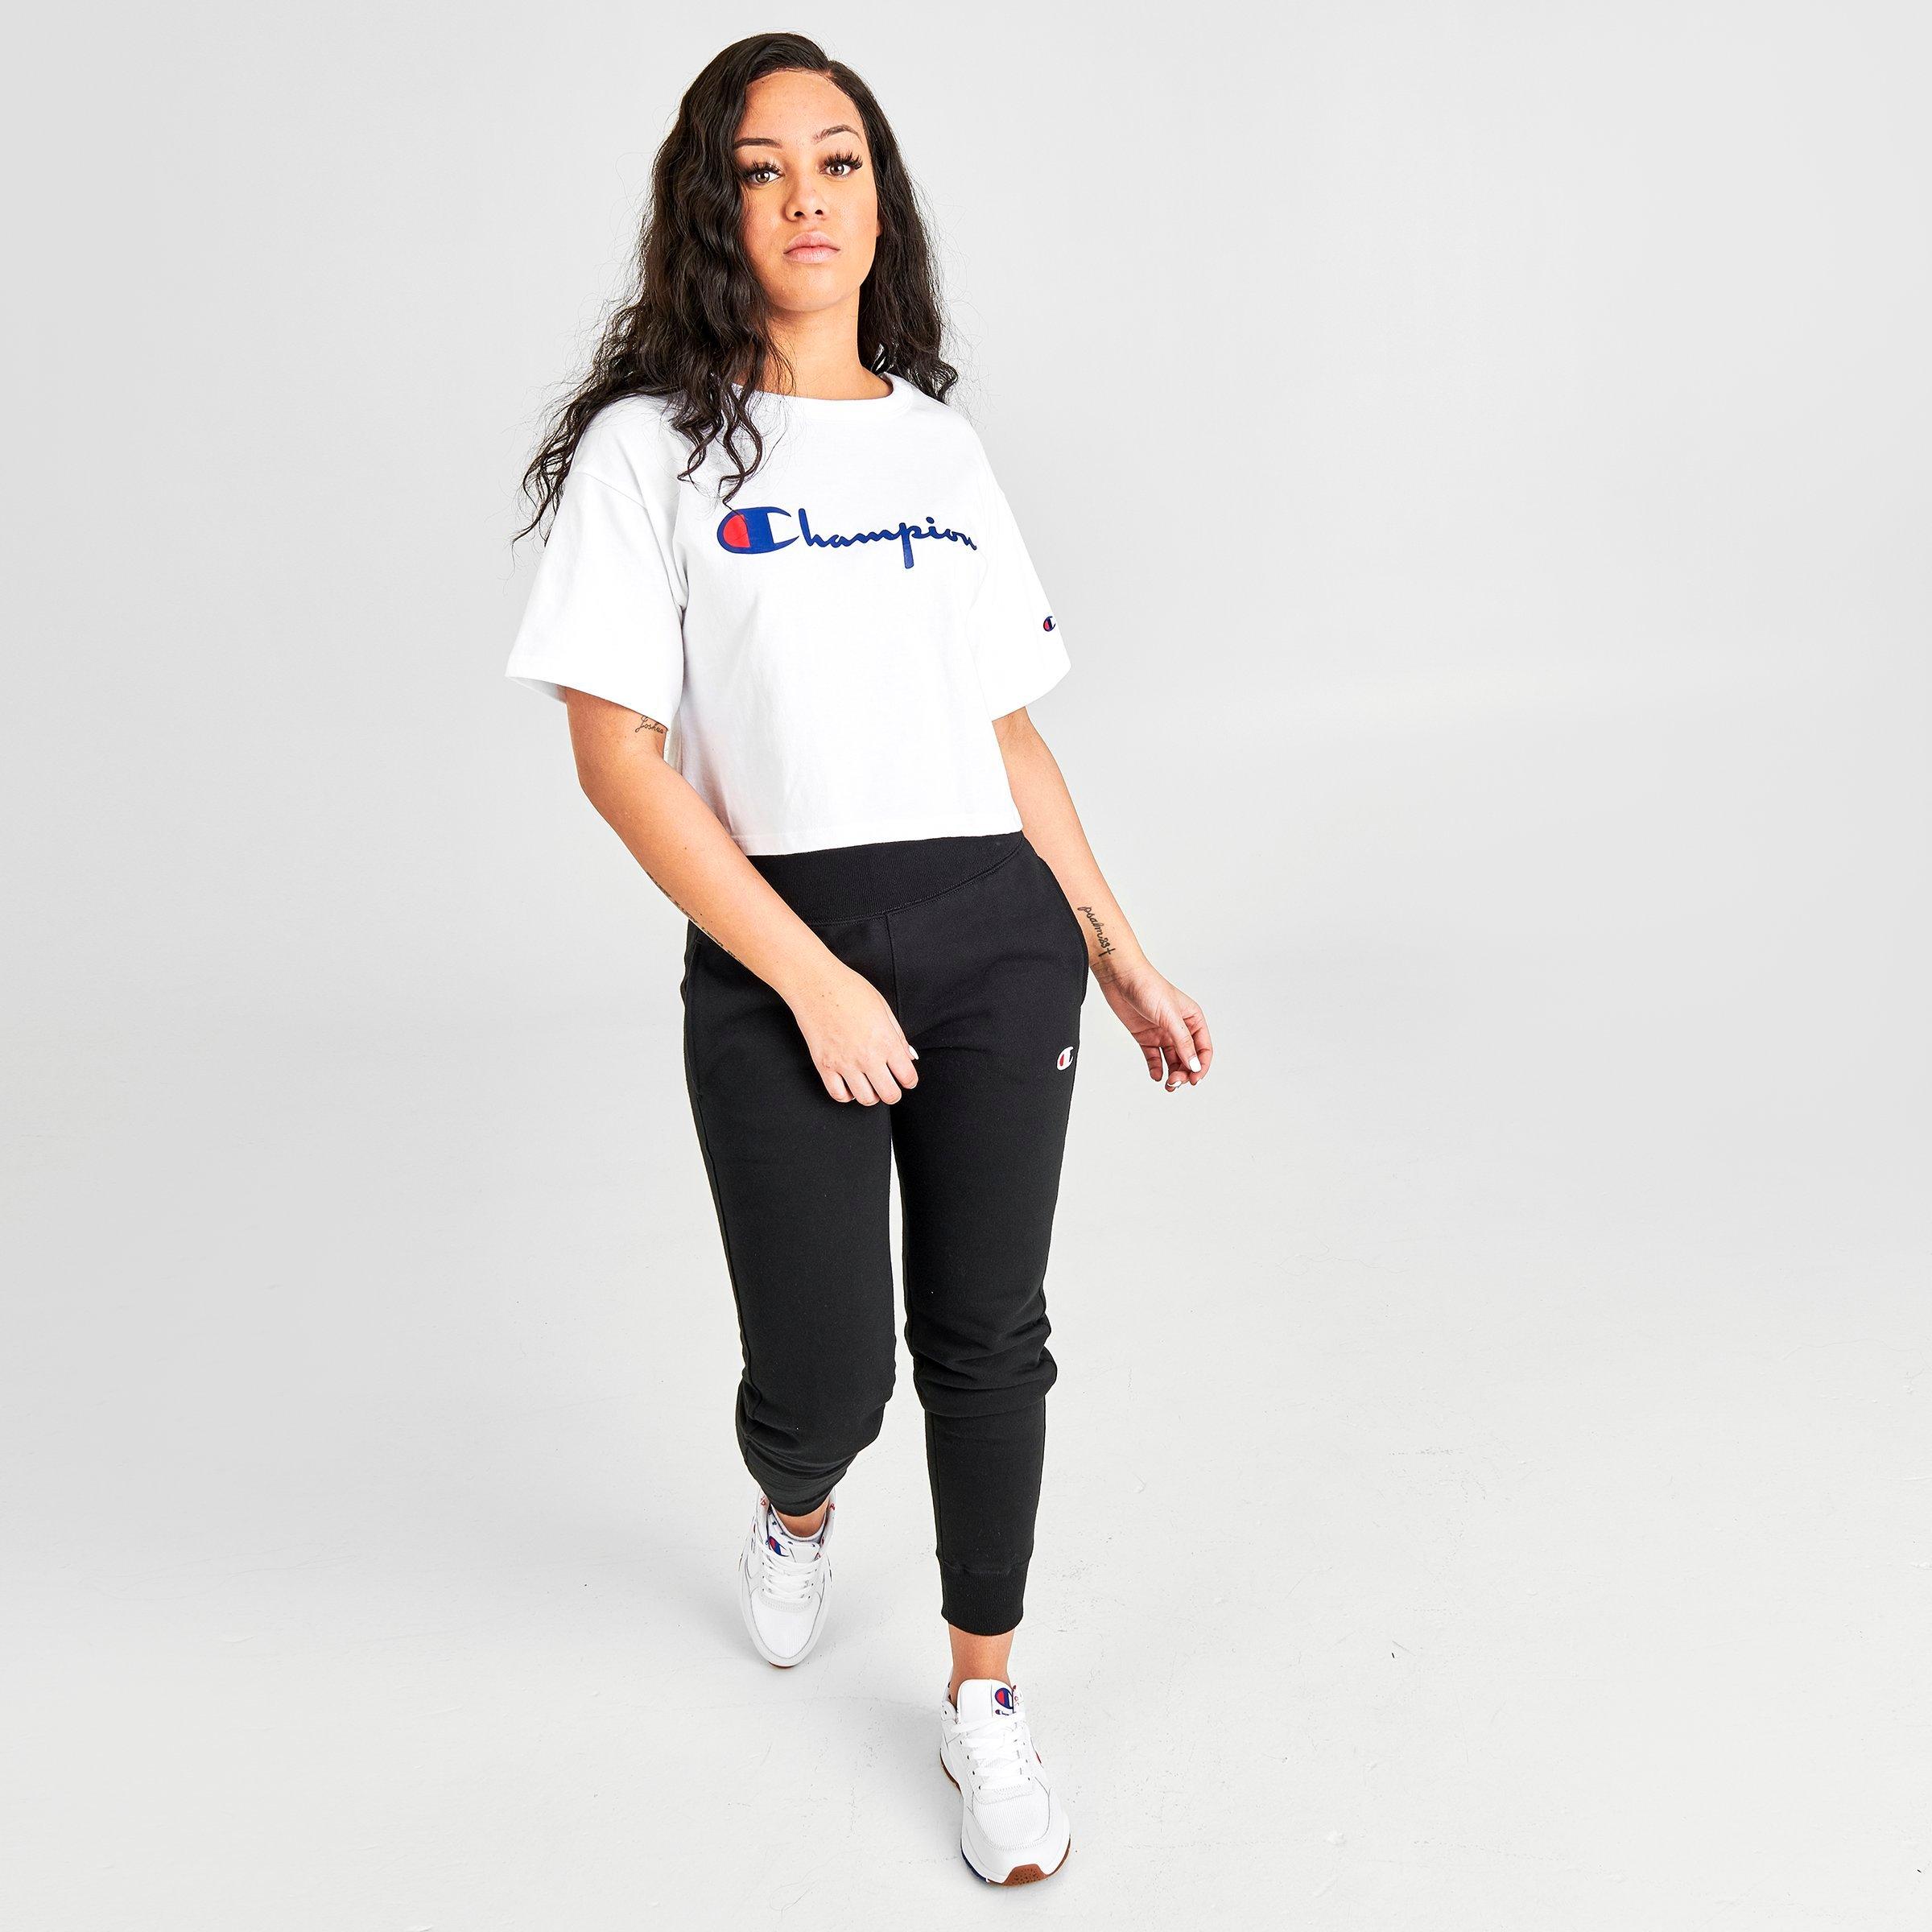 champion shirt outfit